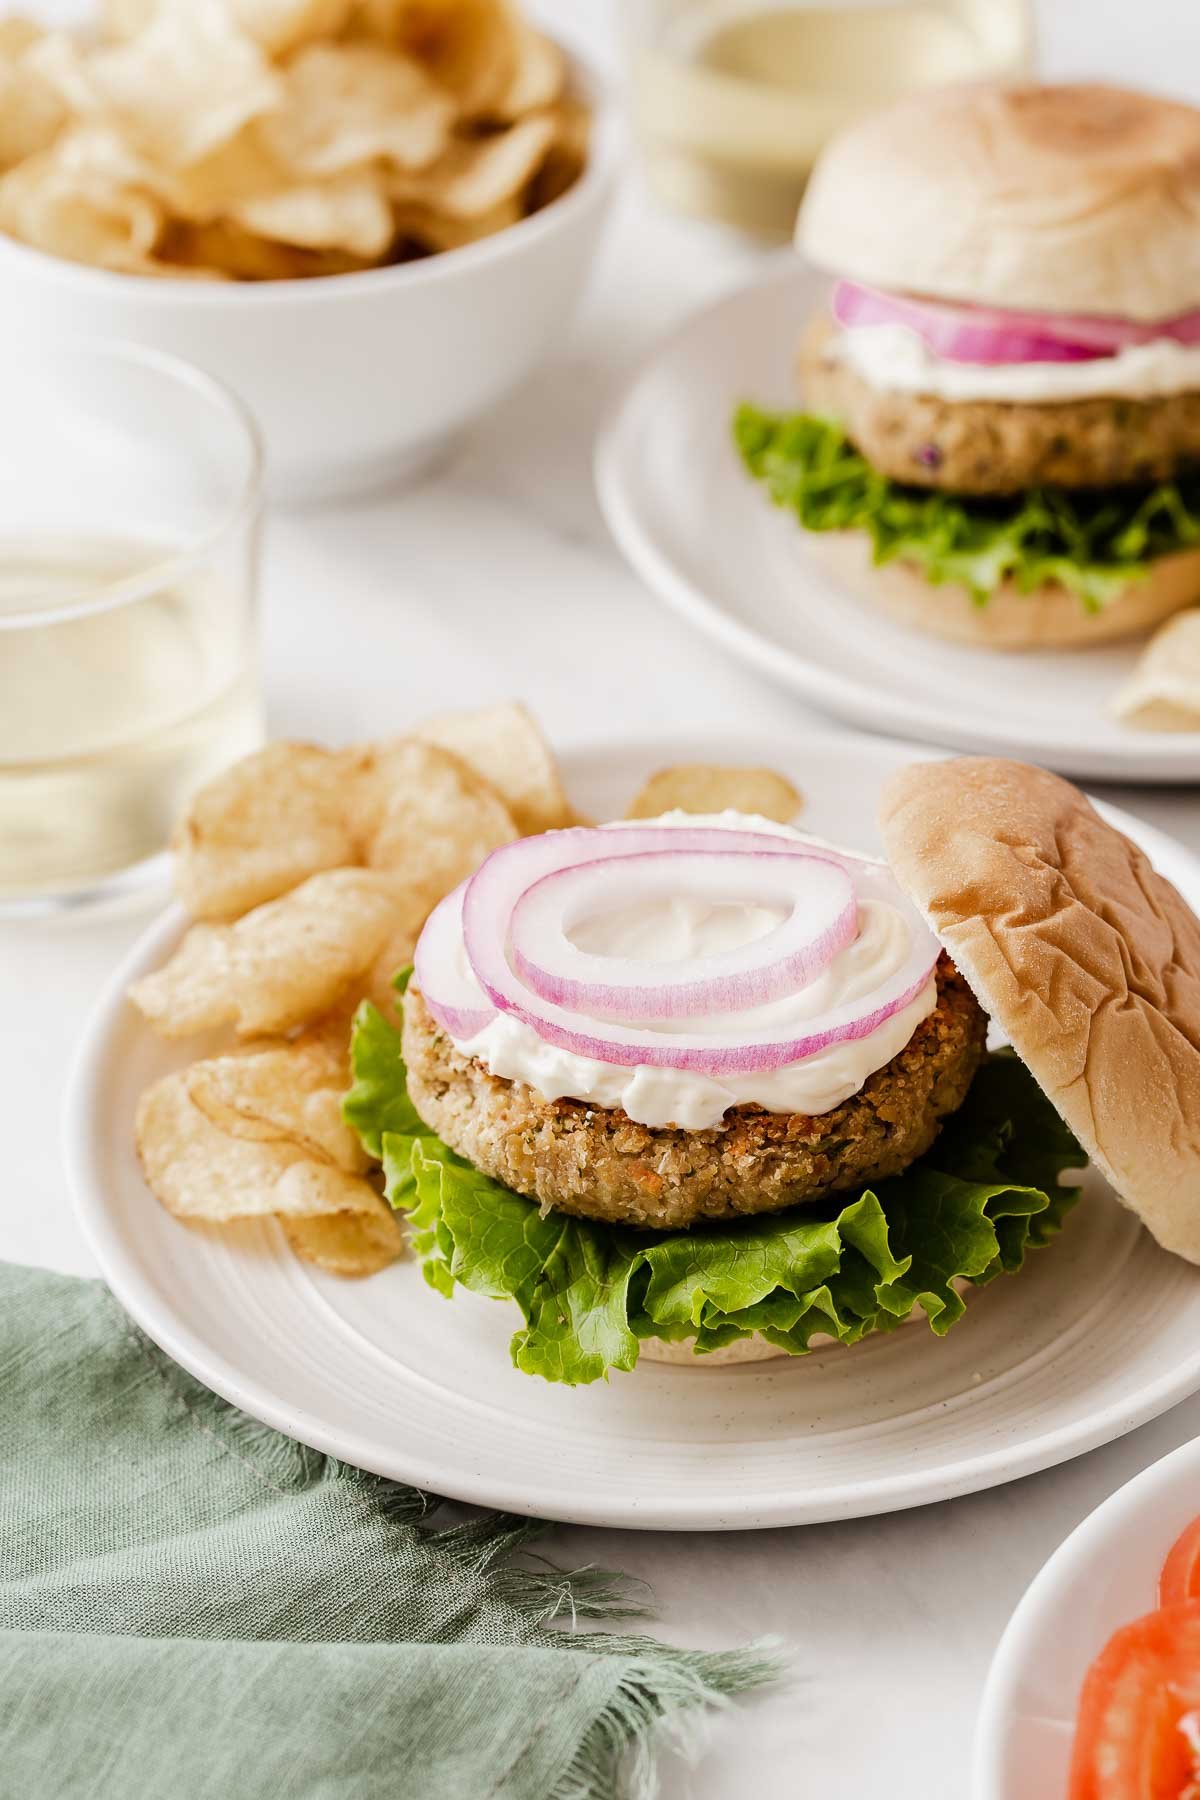 Bean burger topped with lots of mayonnaise and sliced red onion.